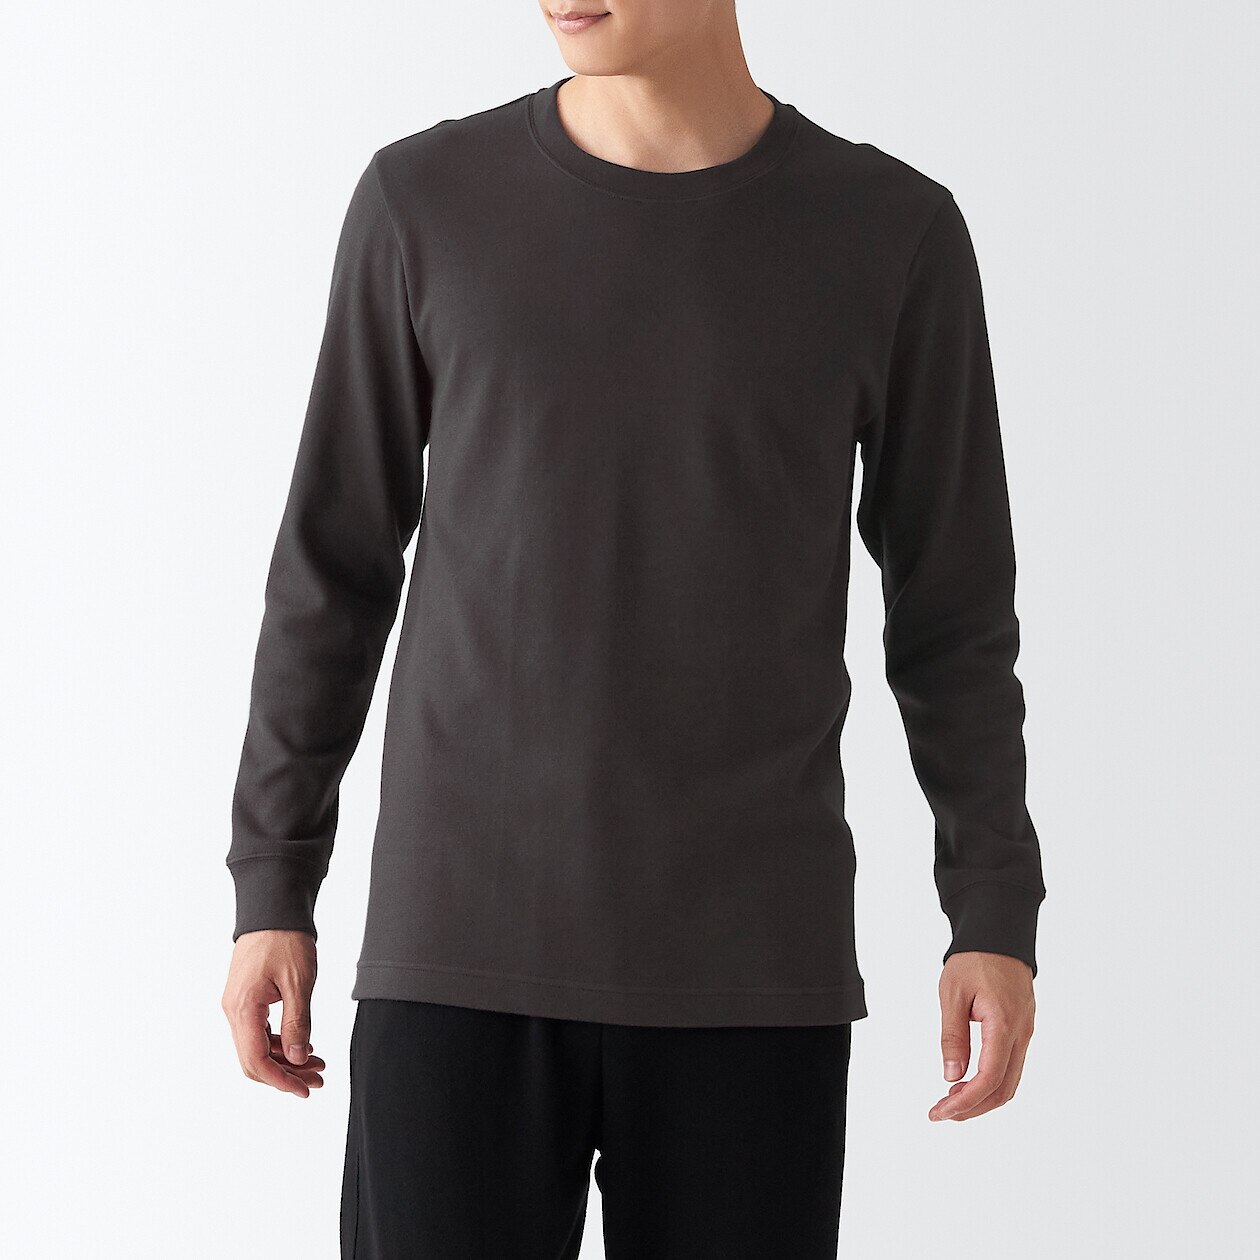 Men's Cotton and Wool Crew Neck Long Sleeve T-shirt 2A